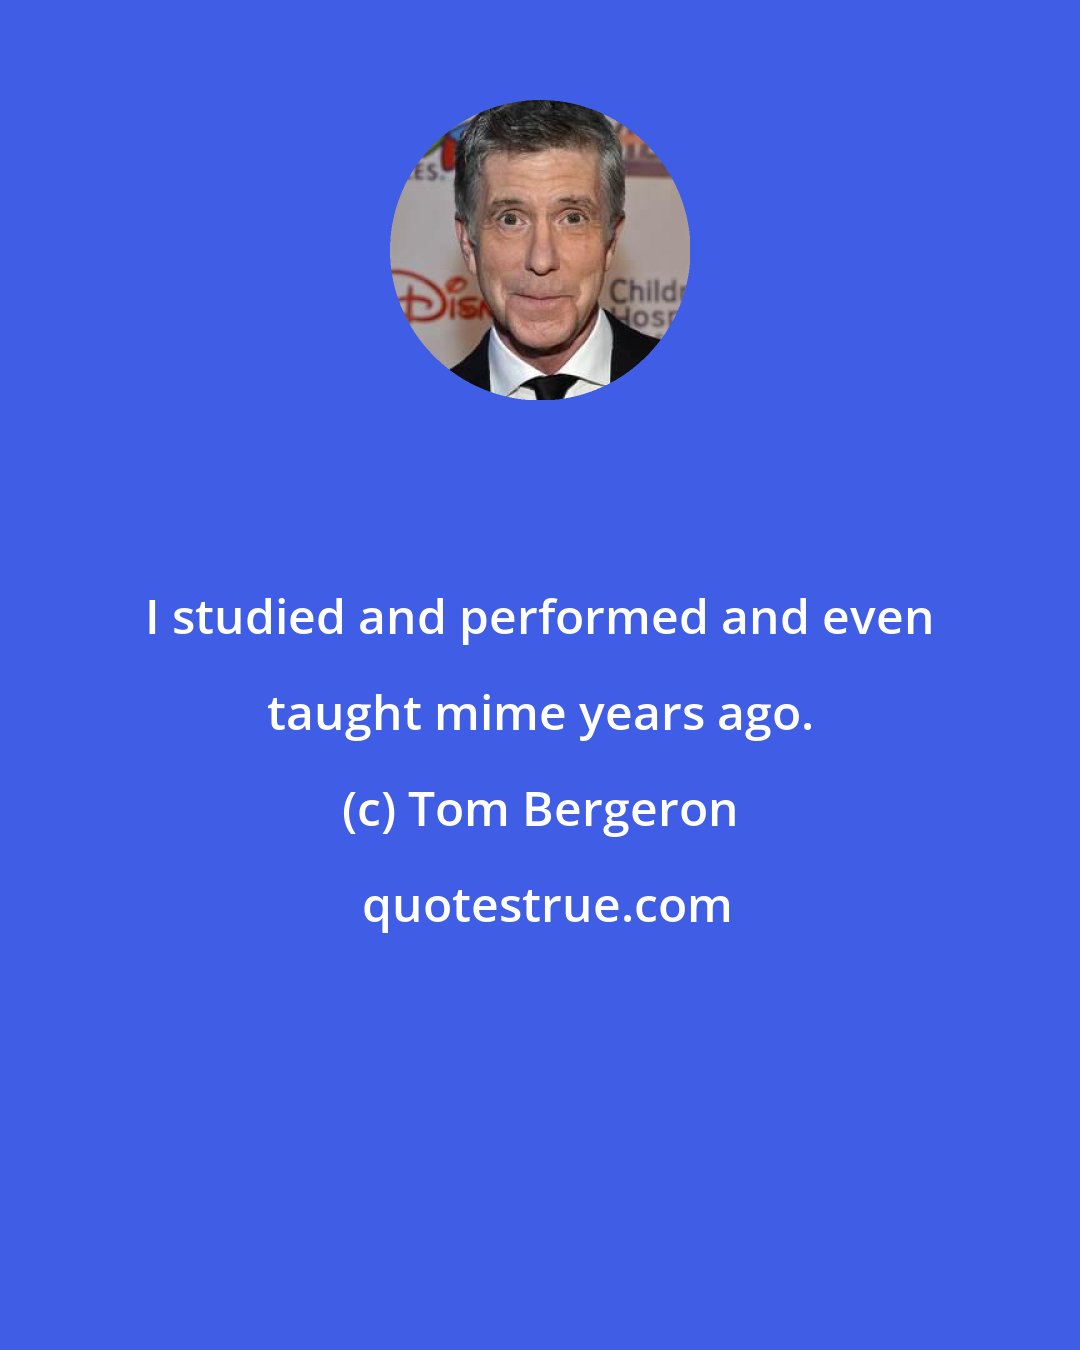 Tom Bergeron: I studied and performed and even taught mime years ago.